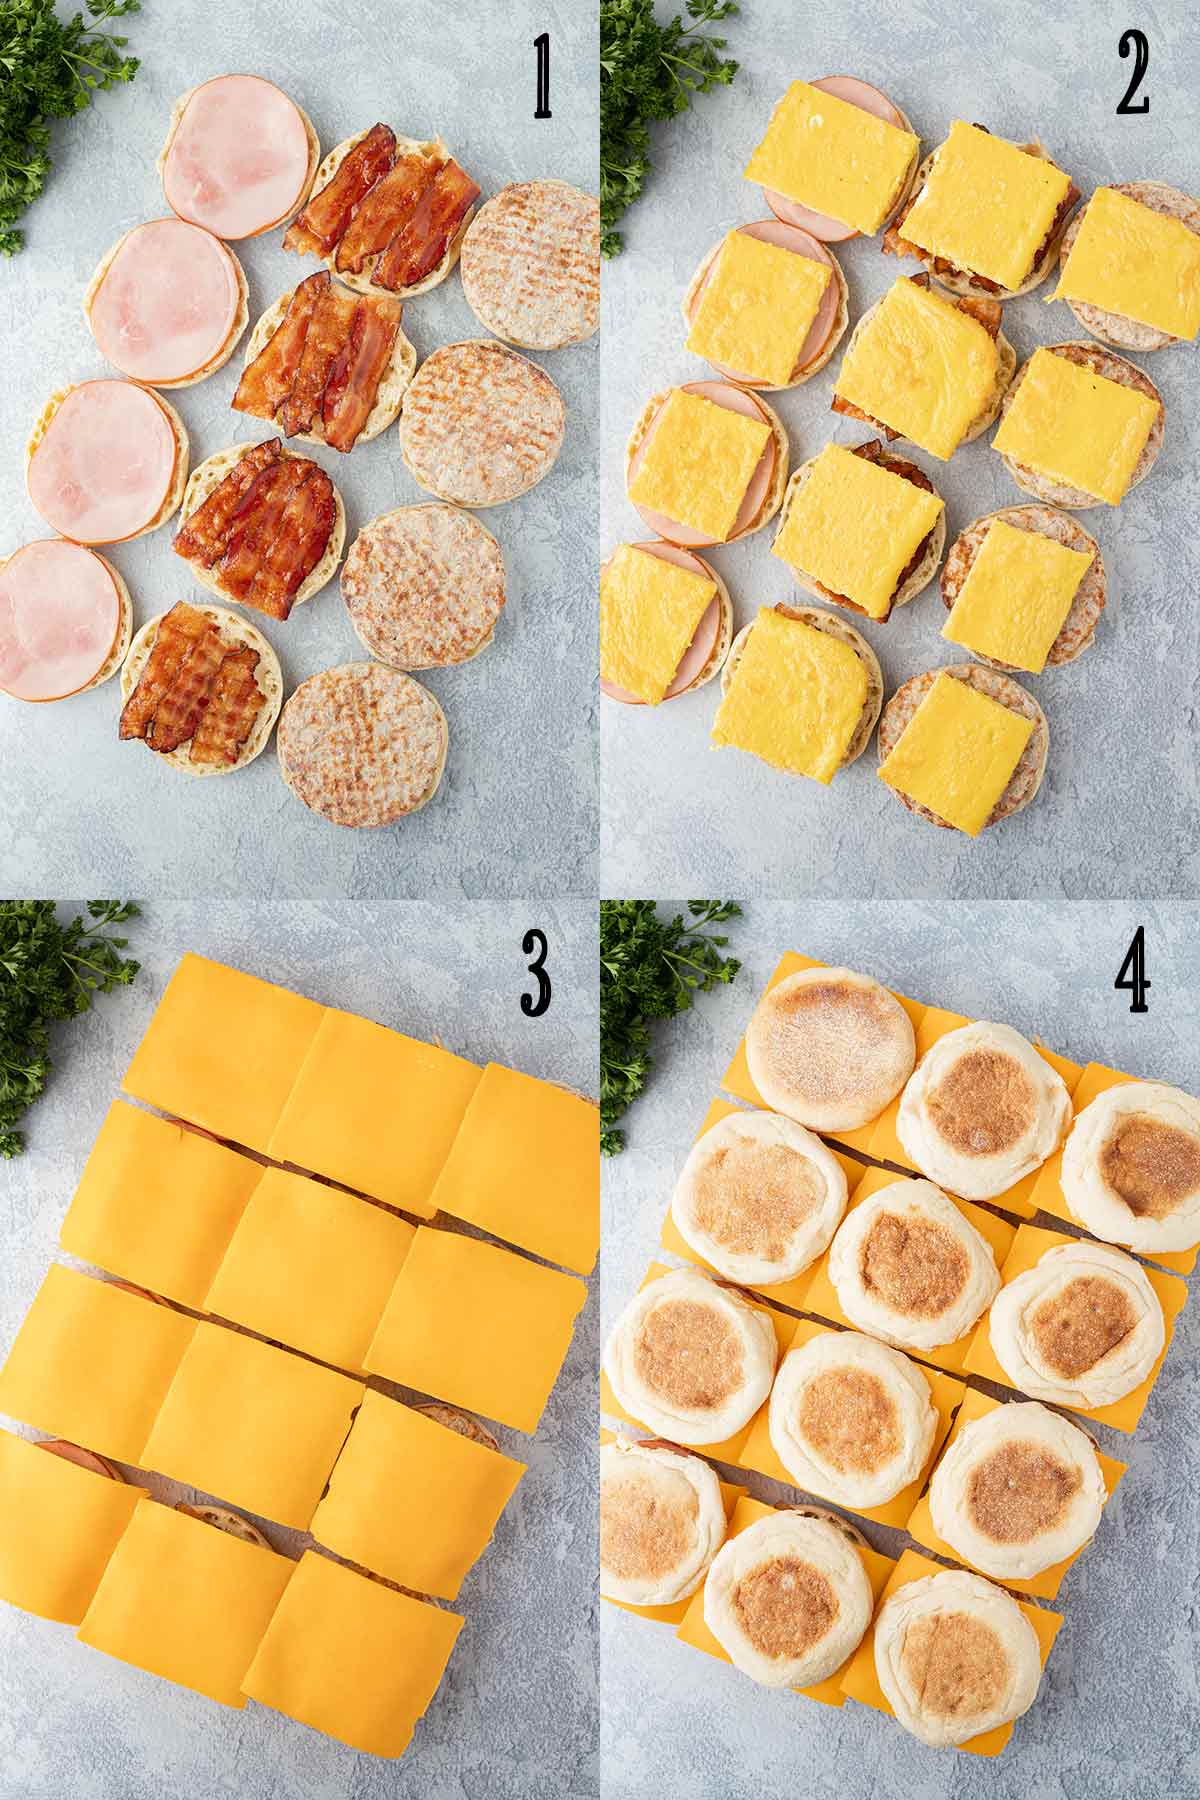 Collage of four photos showing the steps needed to assemble the sandwiches, including adding the meat, then the eggs, then the cheese slices.